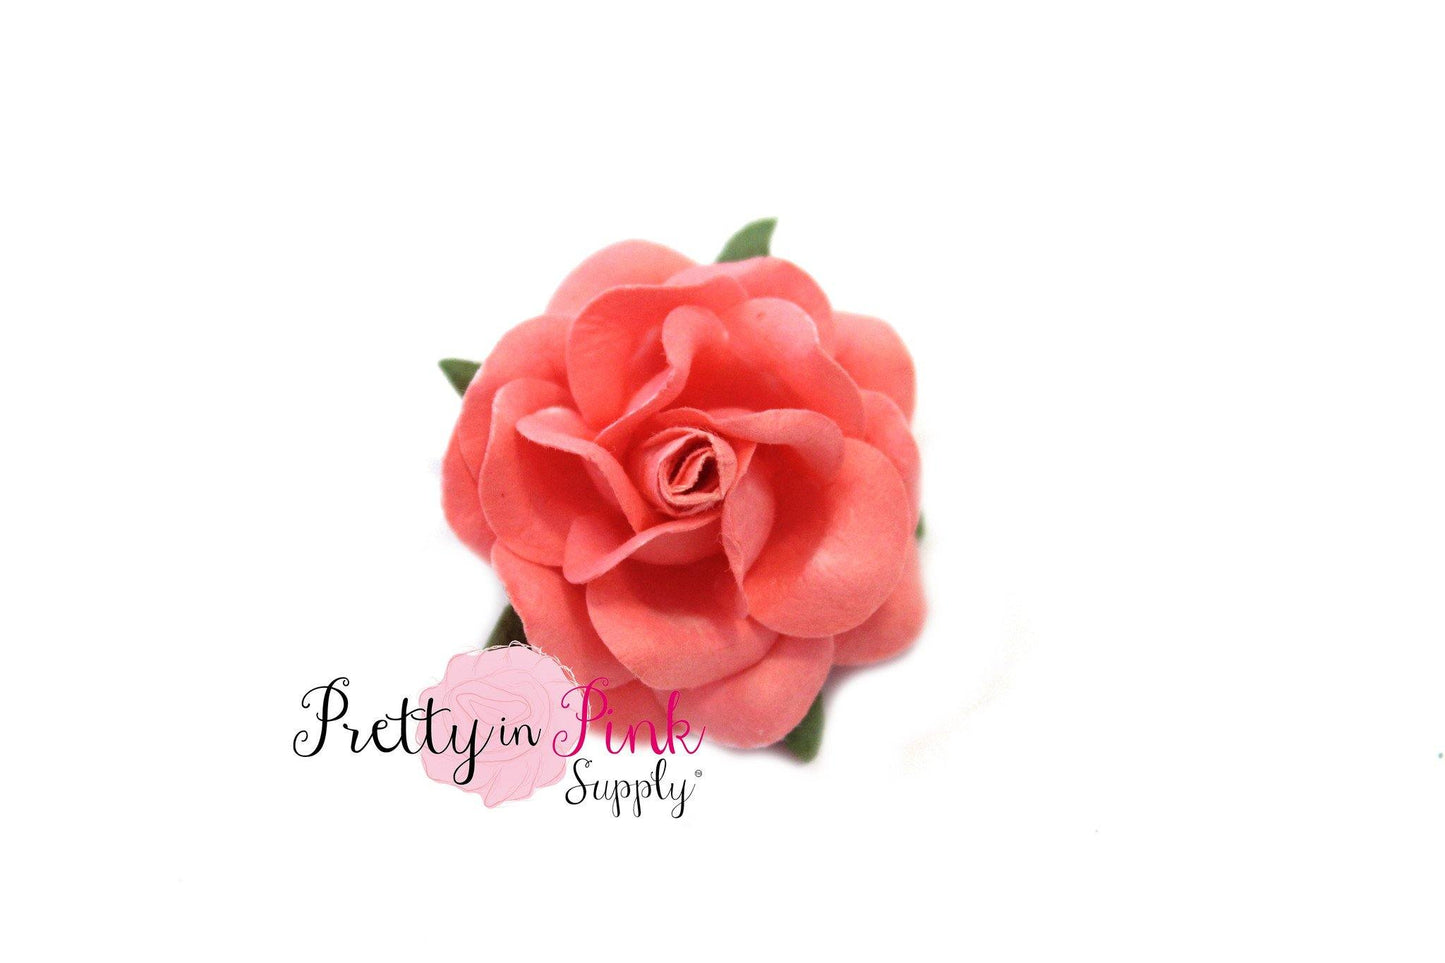 1.5" PREMIUM Coral Paper Rose - Pretty in Pink Supply